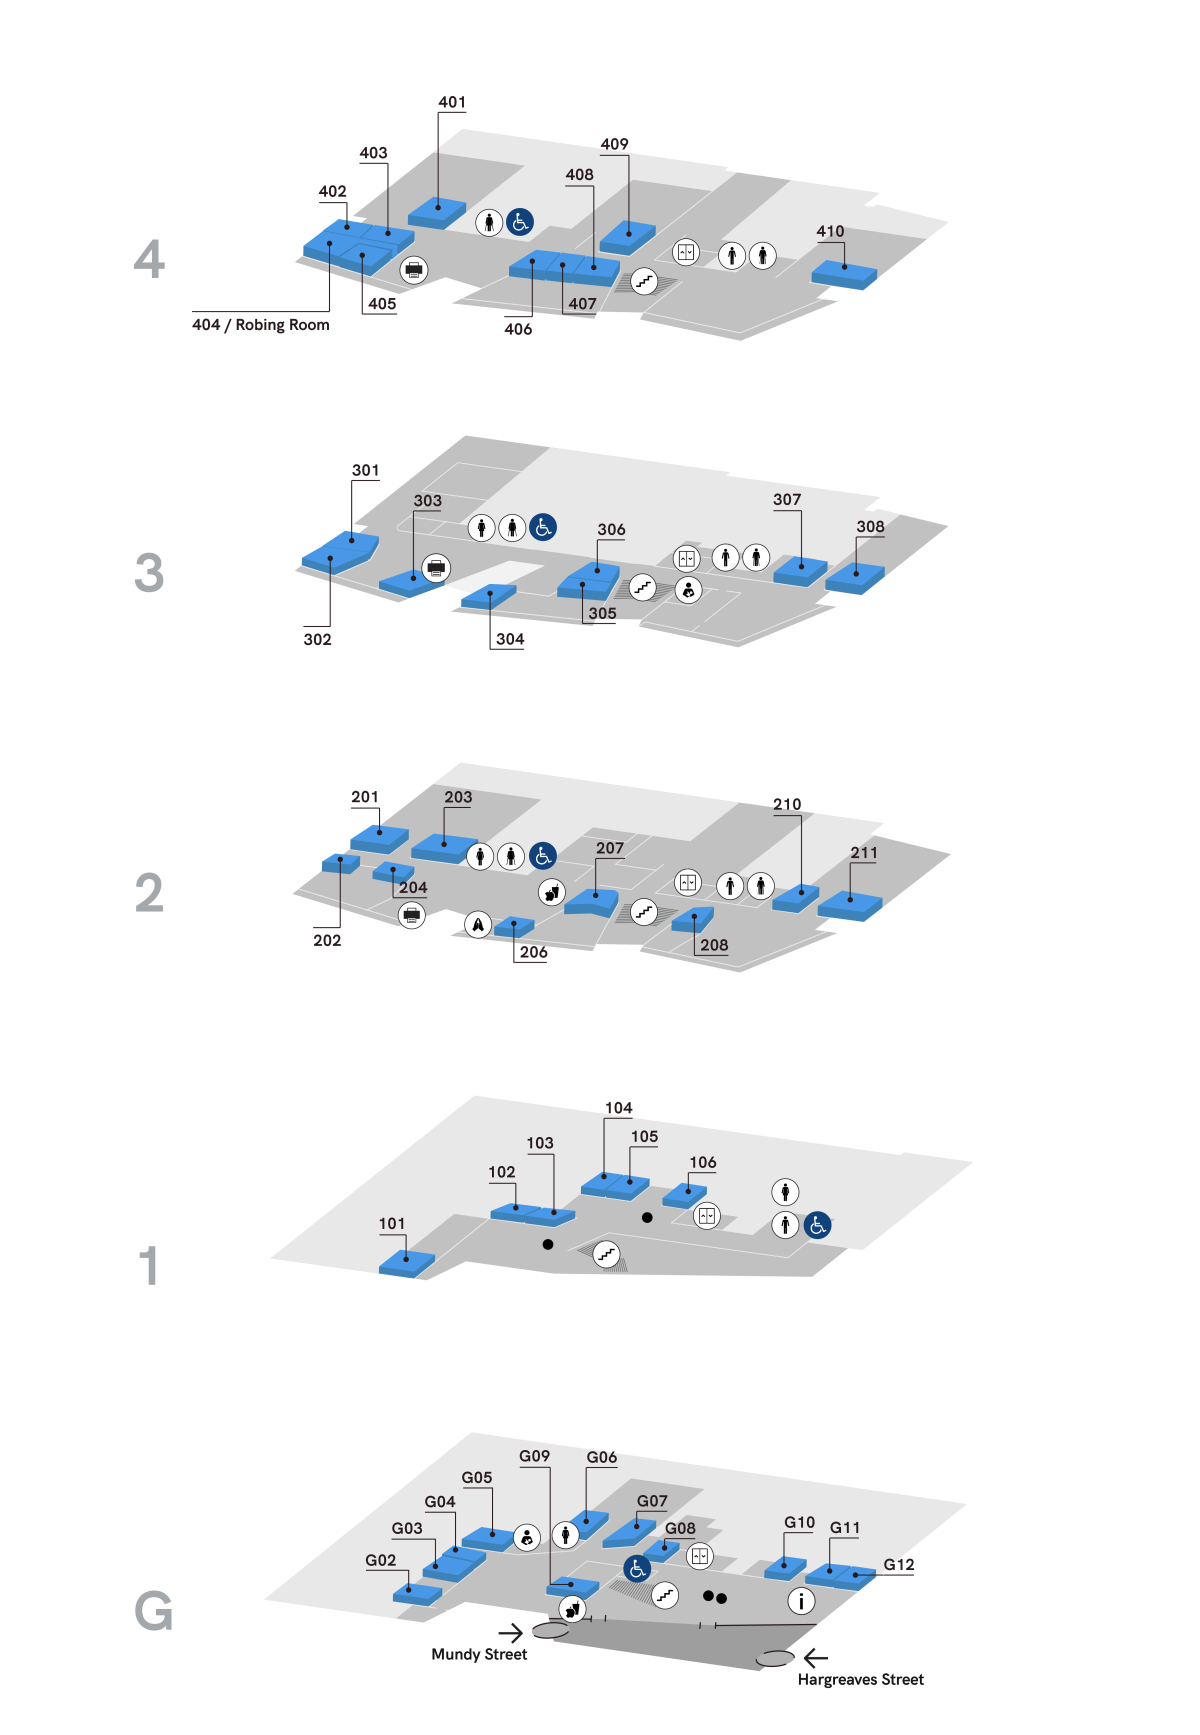 Map of meeting rooms across floors at the Bendigo Law Courts